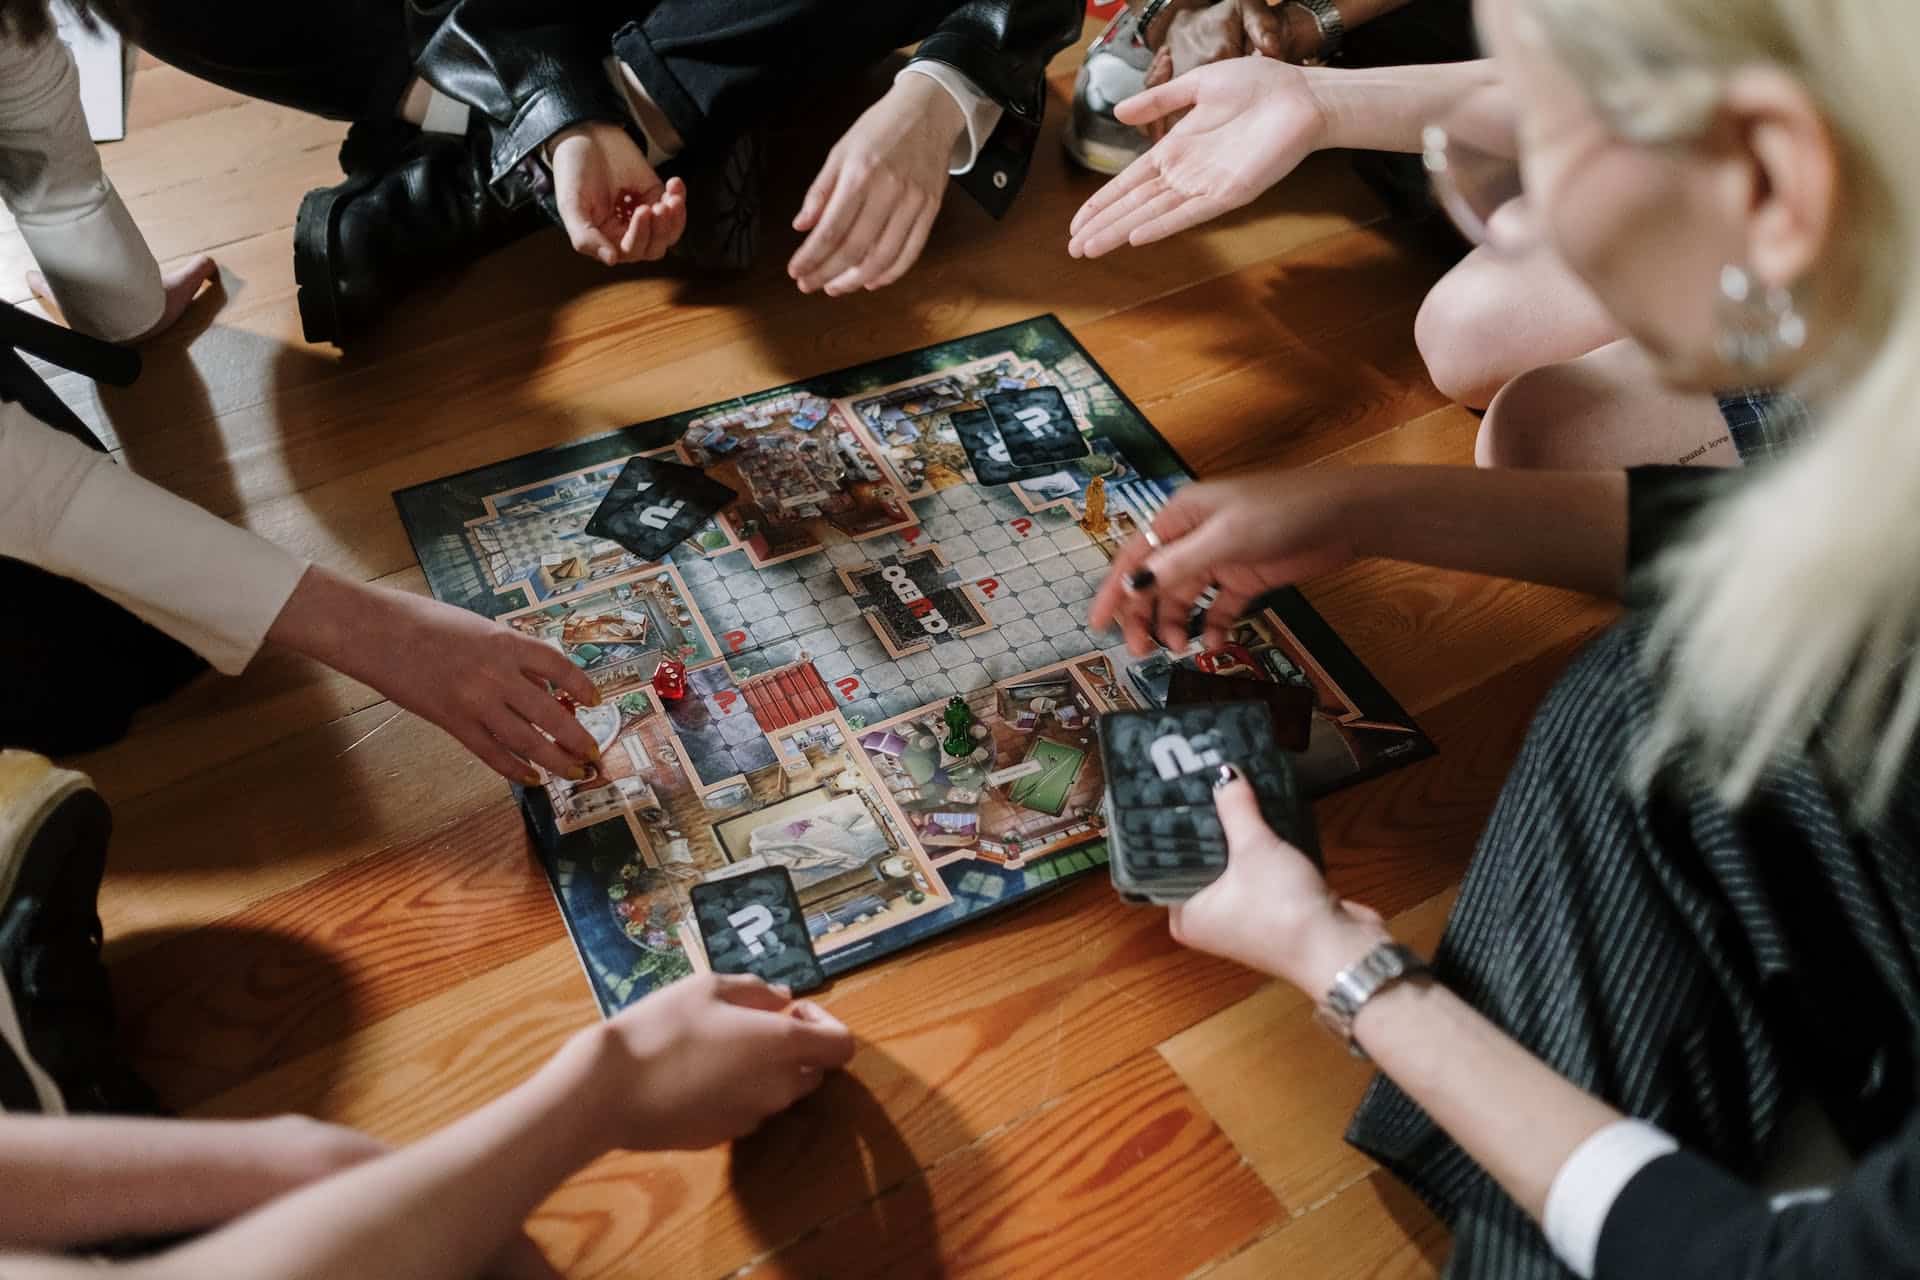 Cluedo game sits in the center with hands reaching out for the pieces.